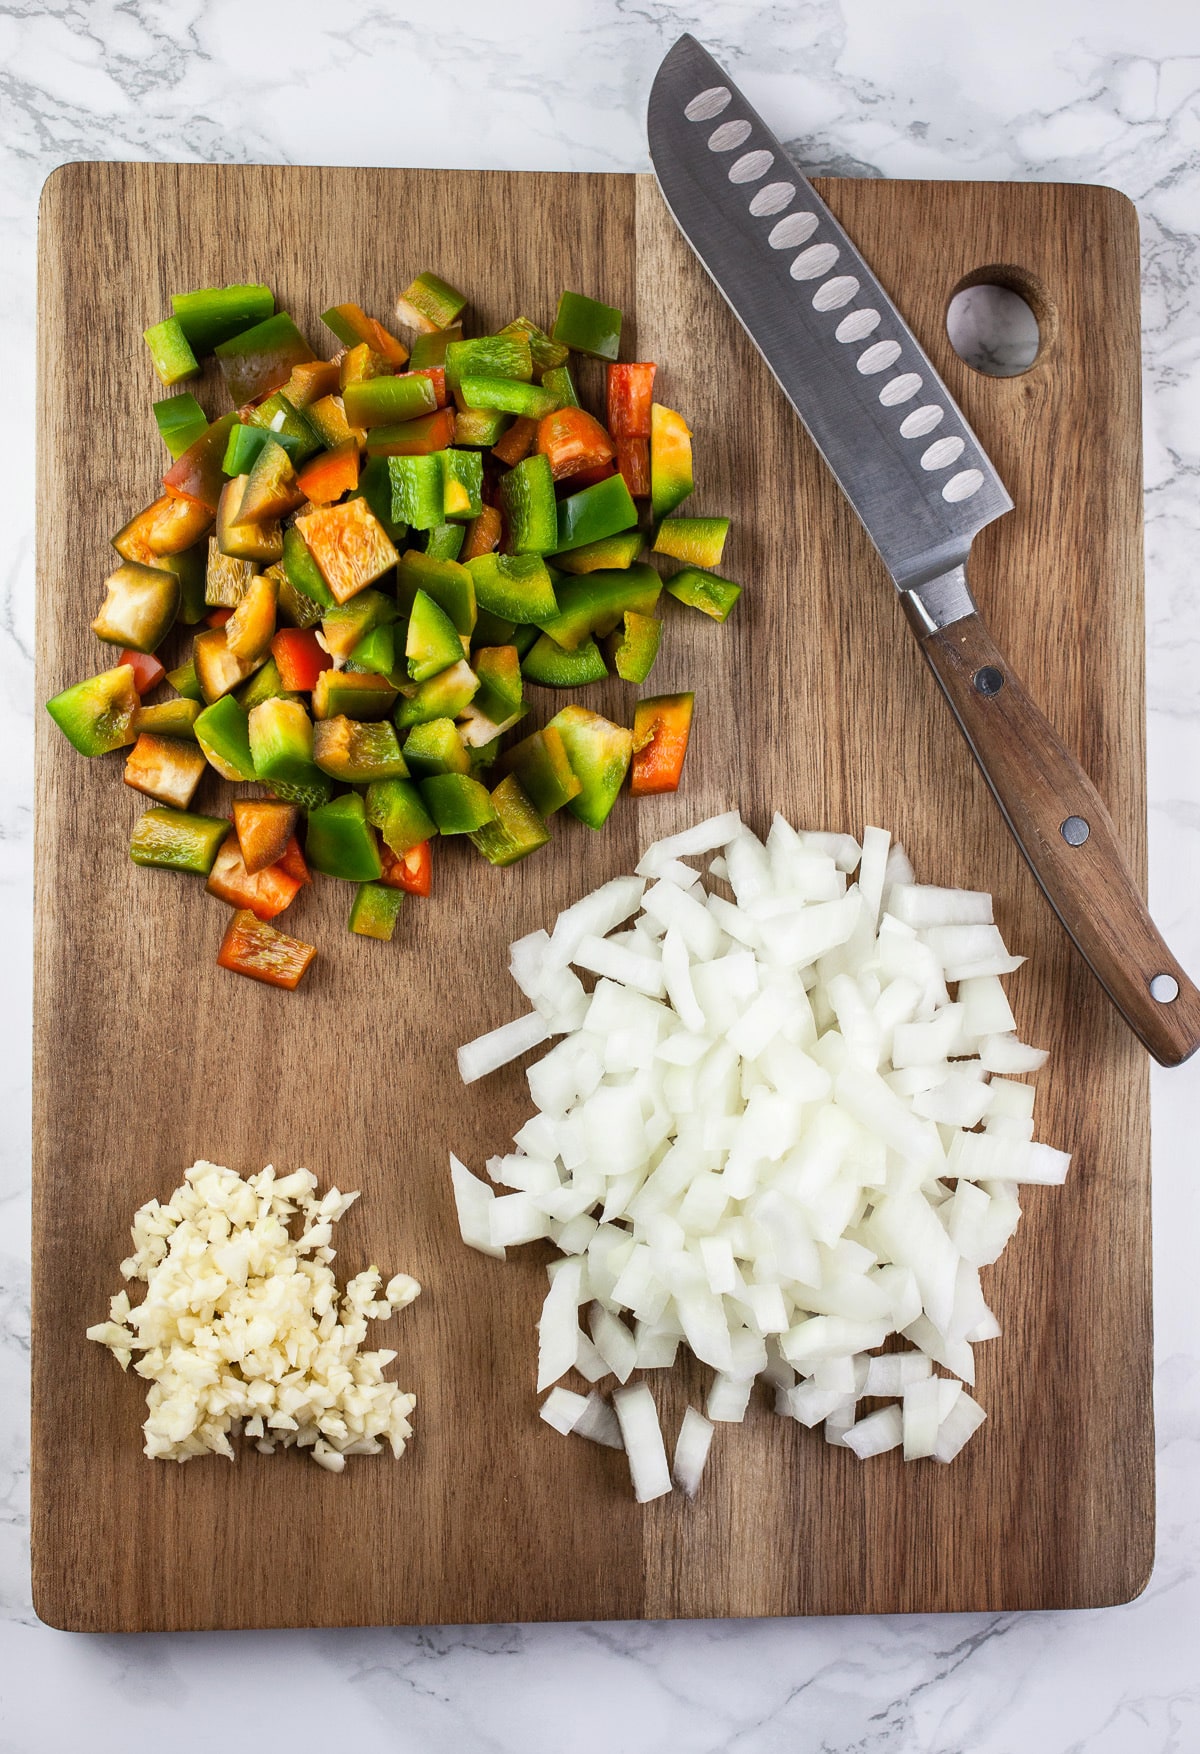 Minced garlic, onions, and bell peppers on wooden cutting board with knife.